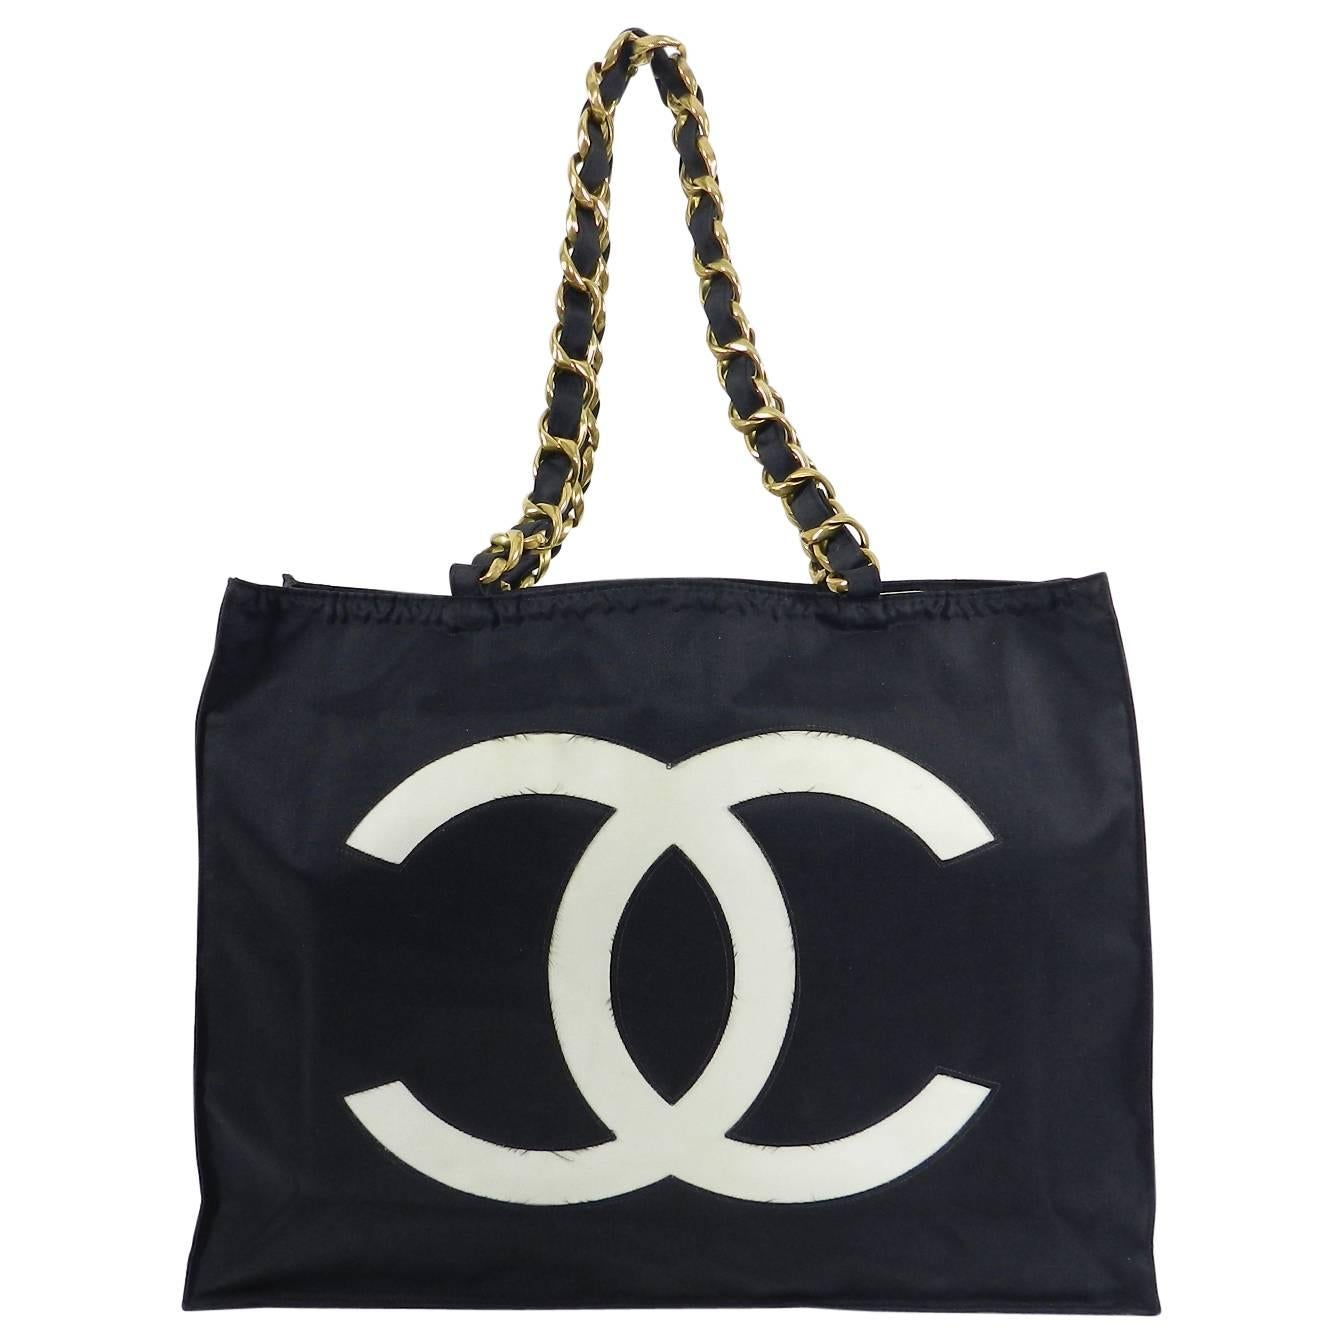 Sold at Auction: Chanel - Small Tote Bag - Large CC Logo - Black